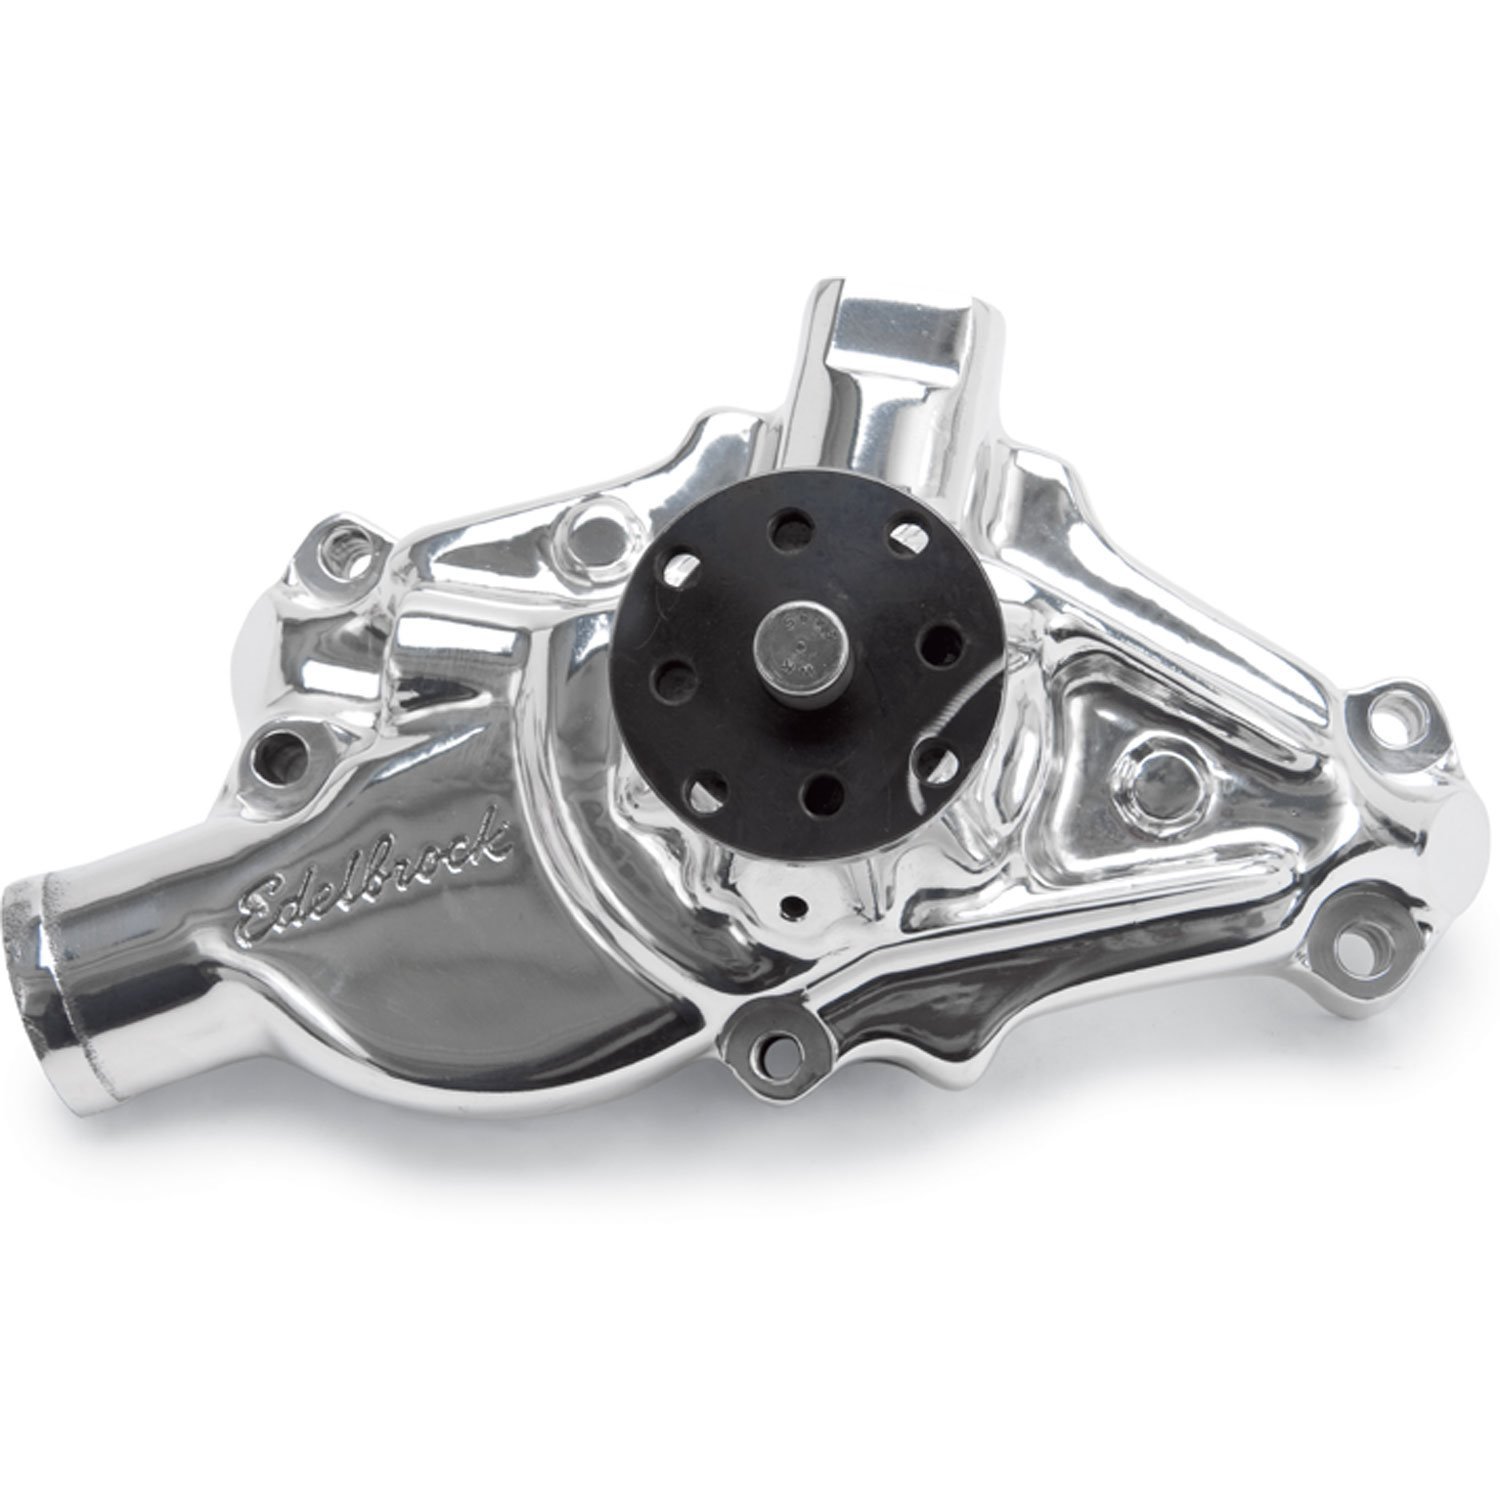 Victor Series Polished Aluminum Water Pump for 1955-1987 Small Block Chevy